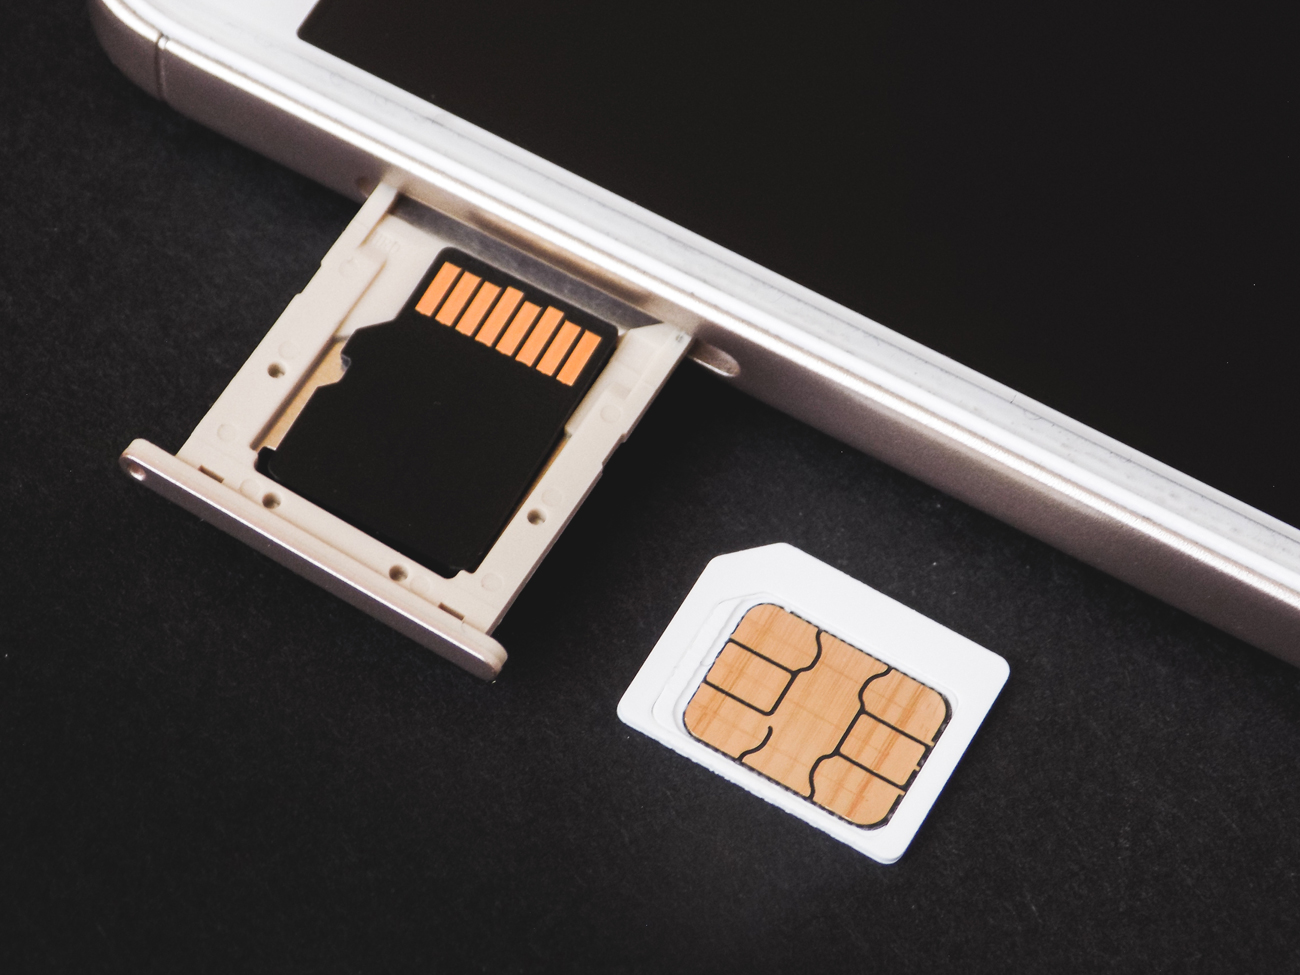 A mobile phone with its sim tray open and a sim card next to it